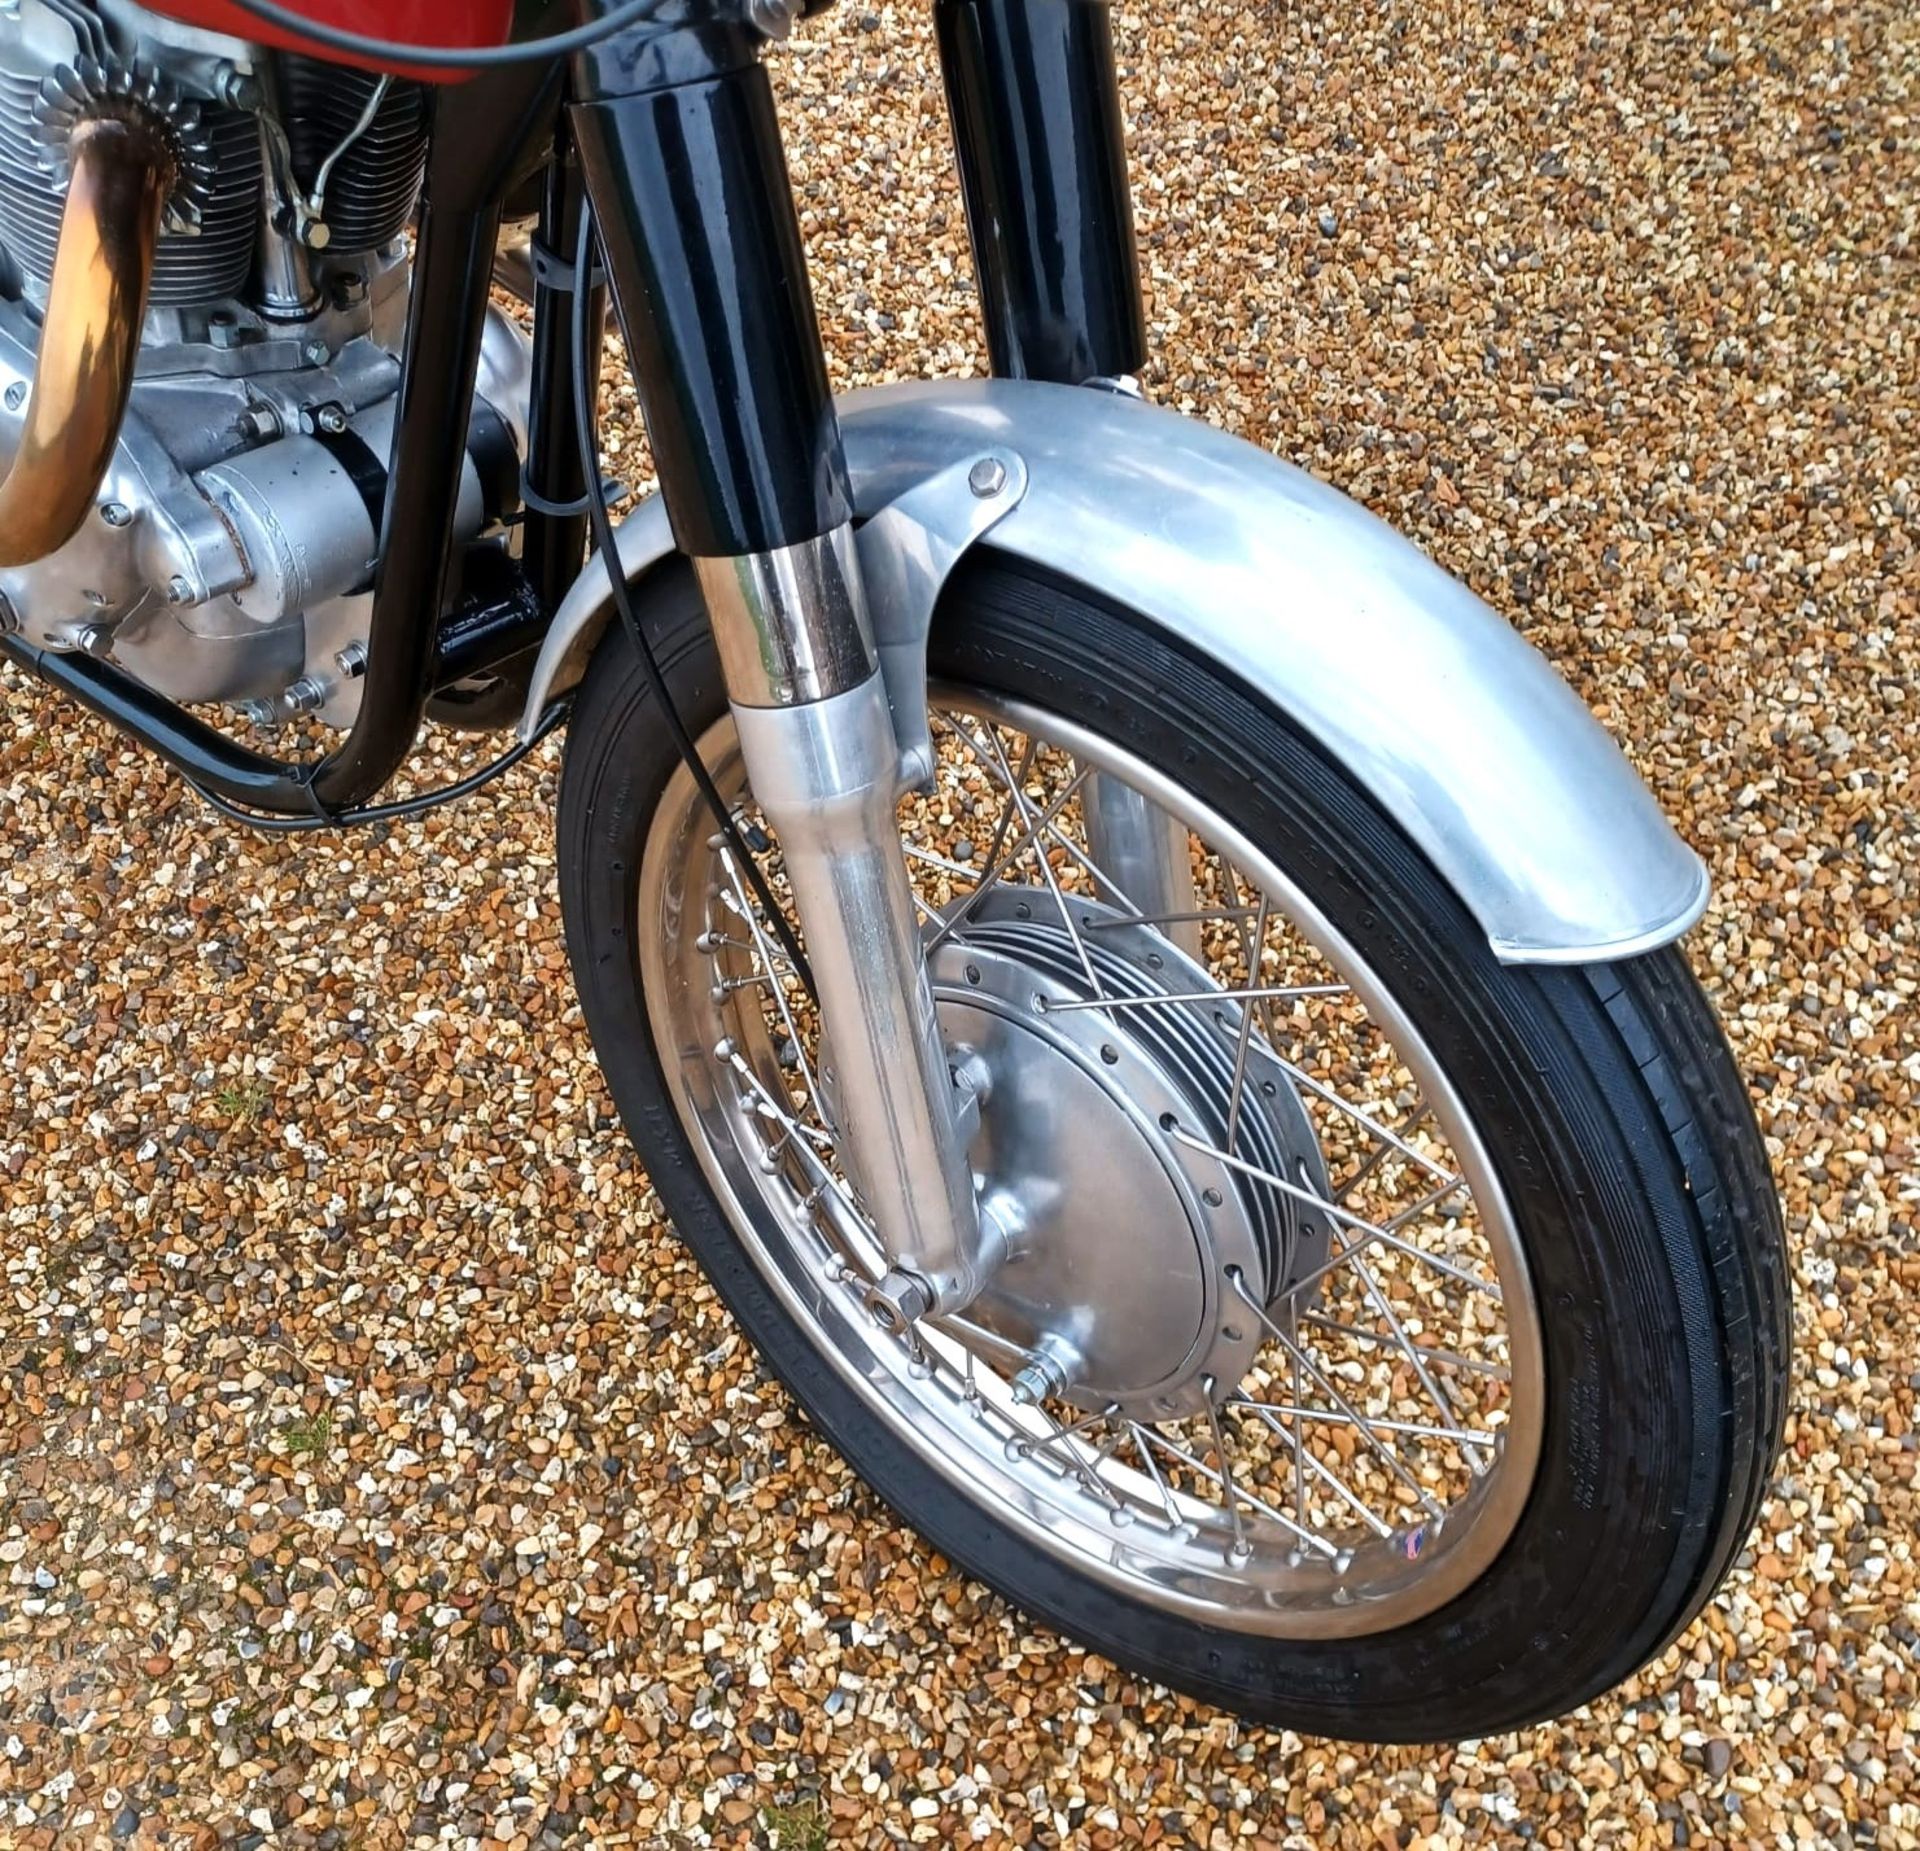 1969 TRITON 500cc Registration Number: WHW 241H Frame Number: TBA Recorded Mileage: 1658 - Subject - Image 13 of 14